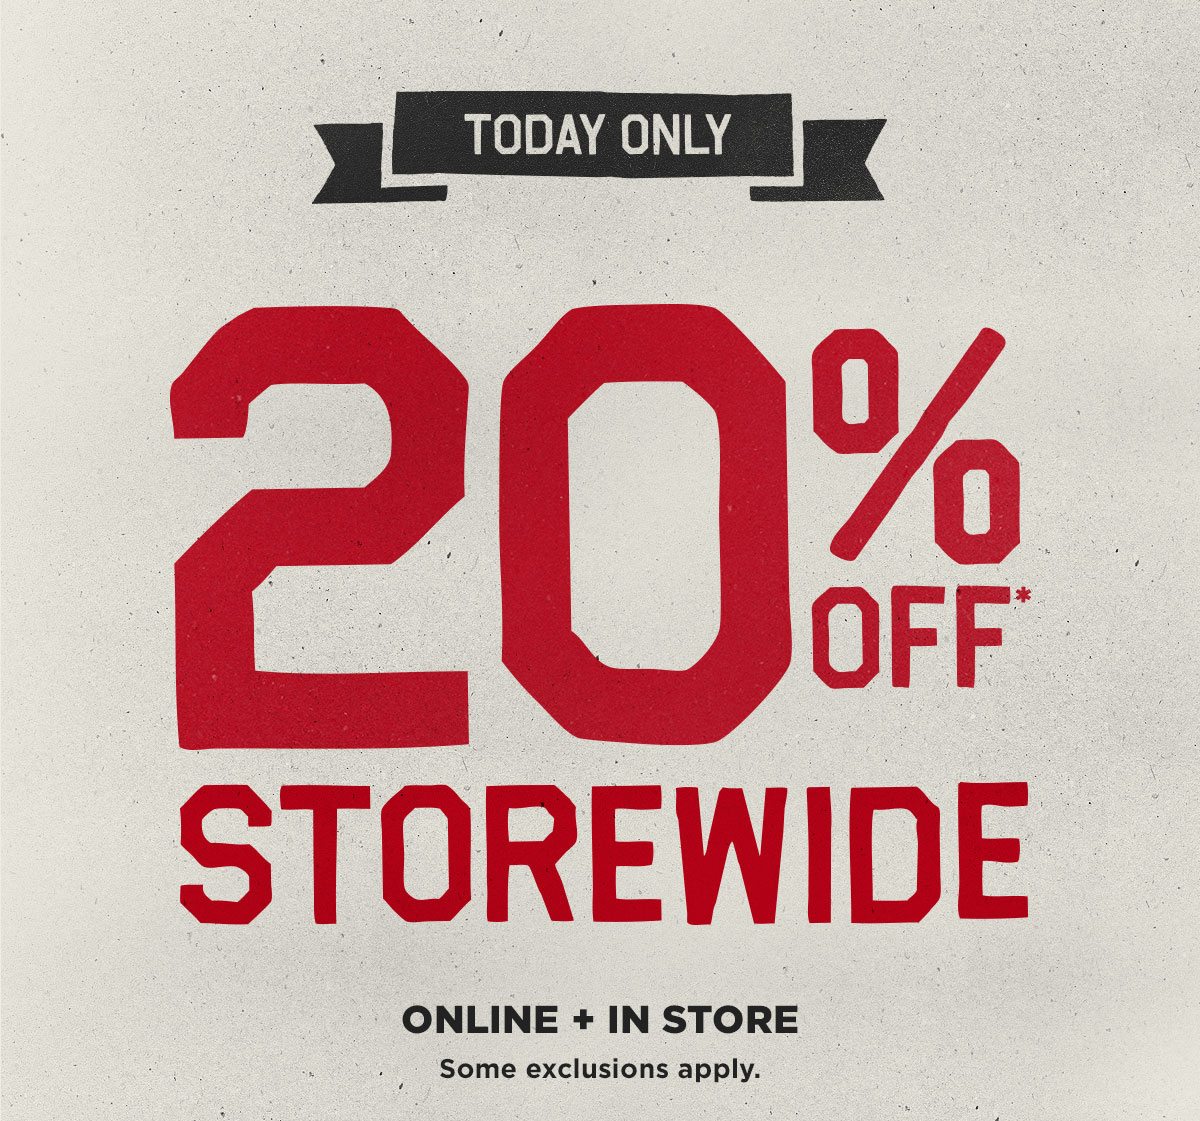 Today Only. 20% Off Storewide* Online and In Store. Some exclusions apply.